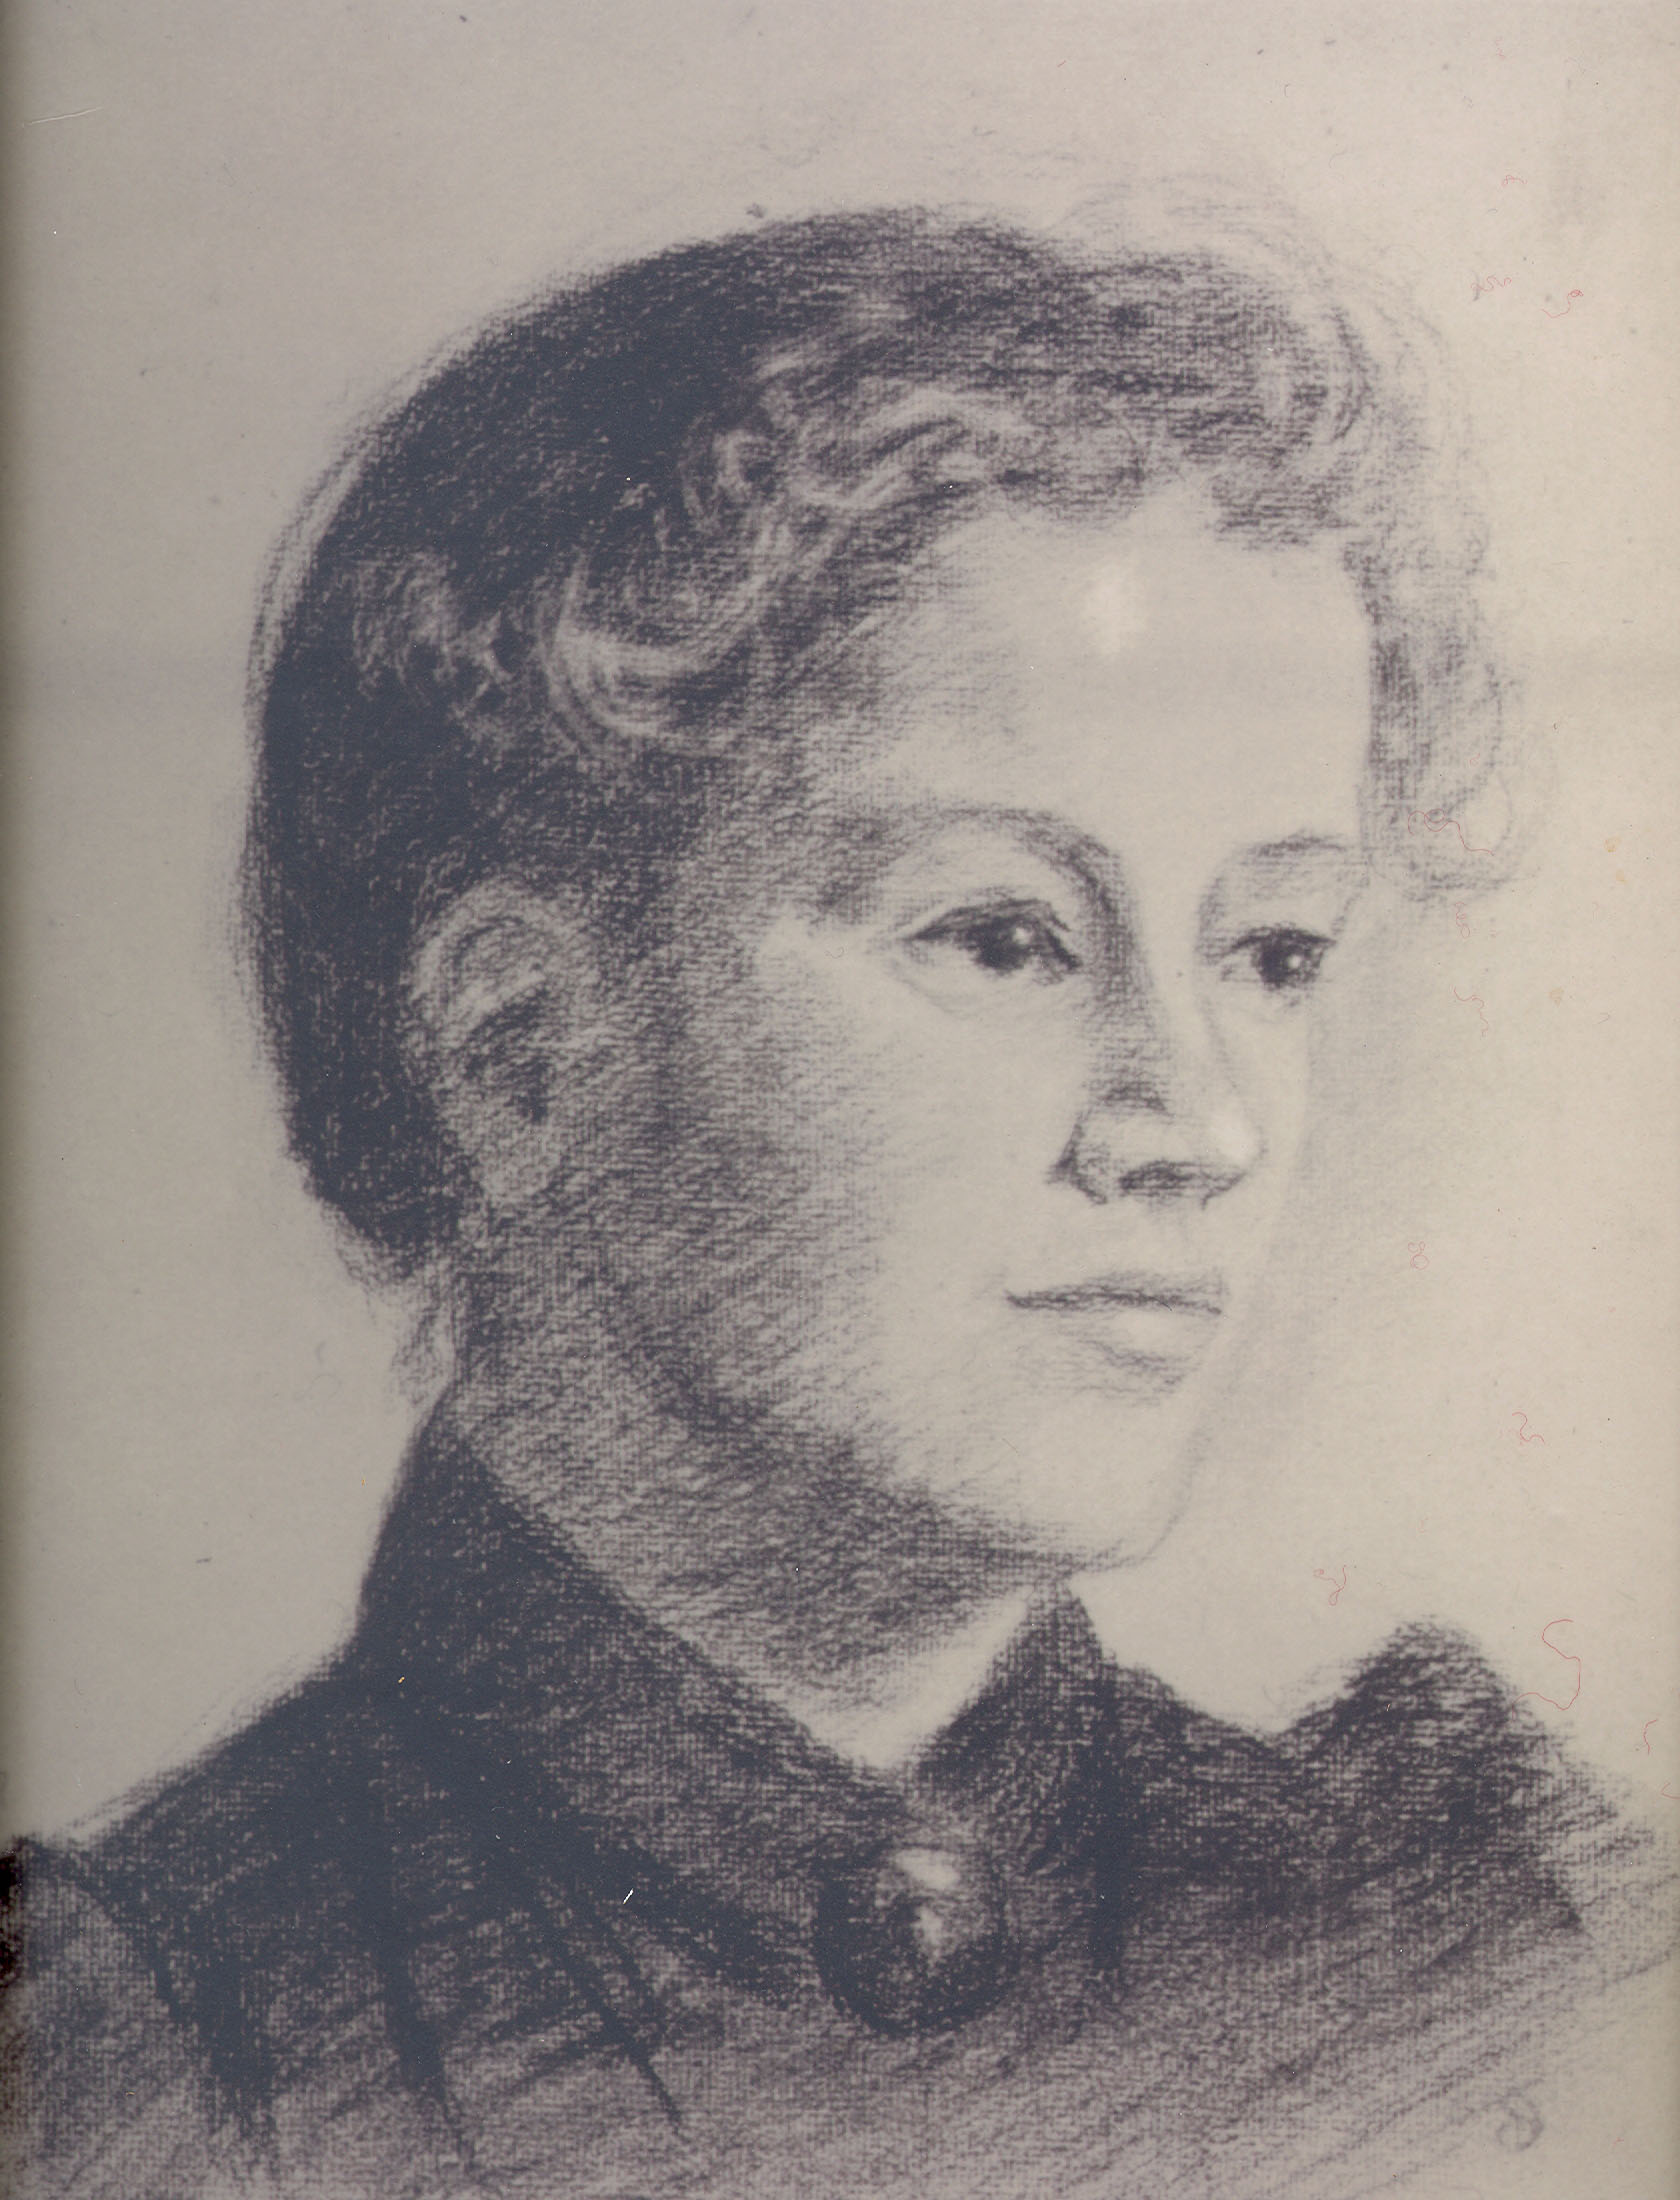 A sketch of Rosamond Stephen, RCB Library picture collection.